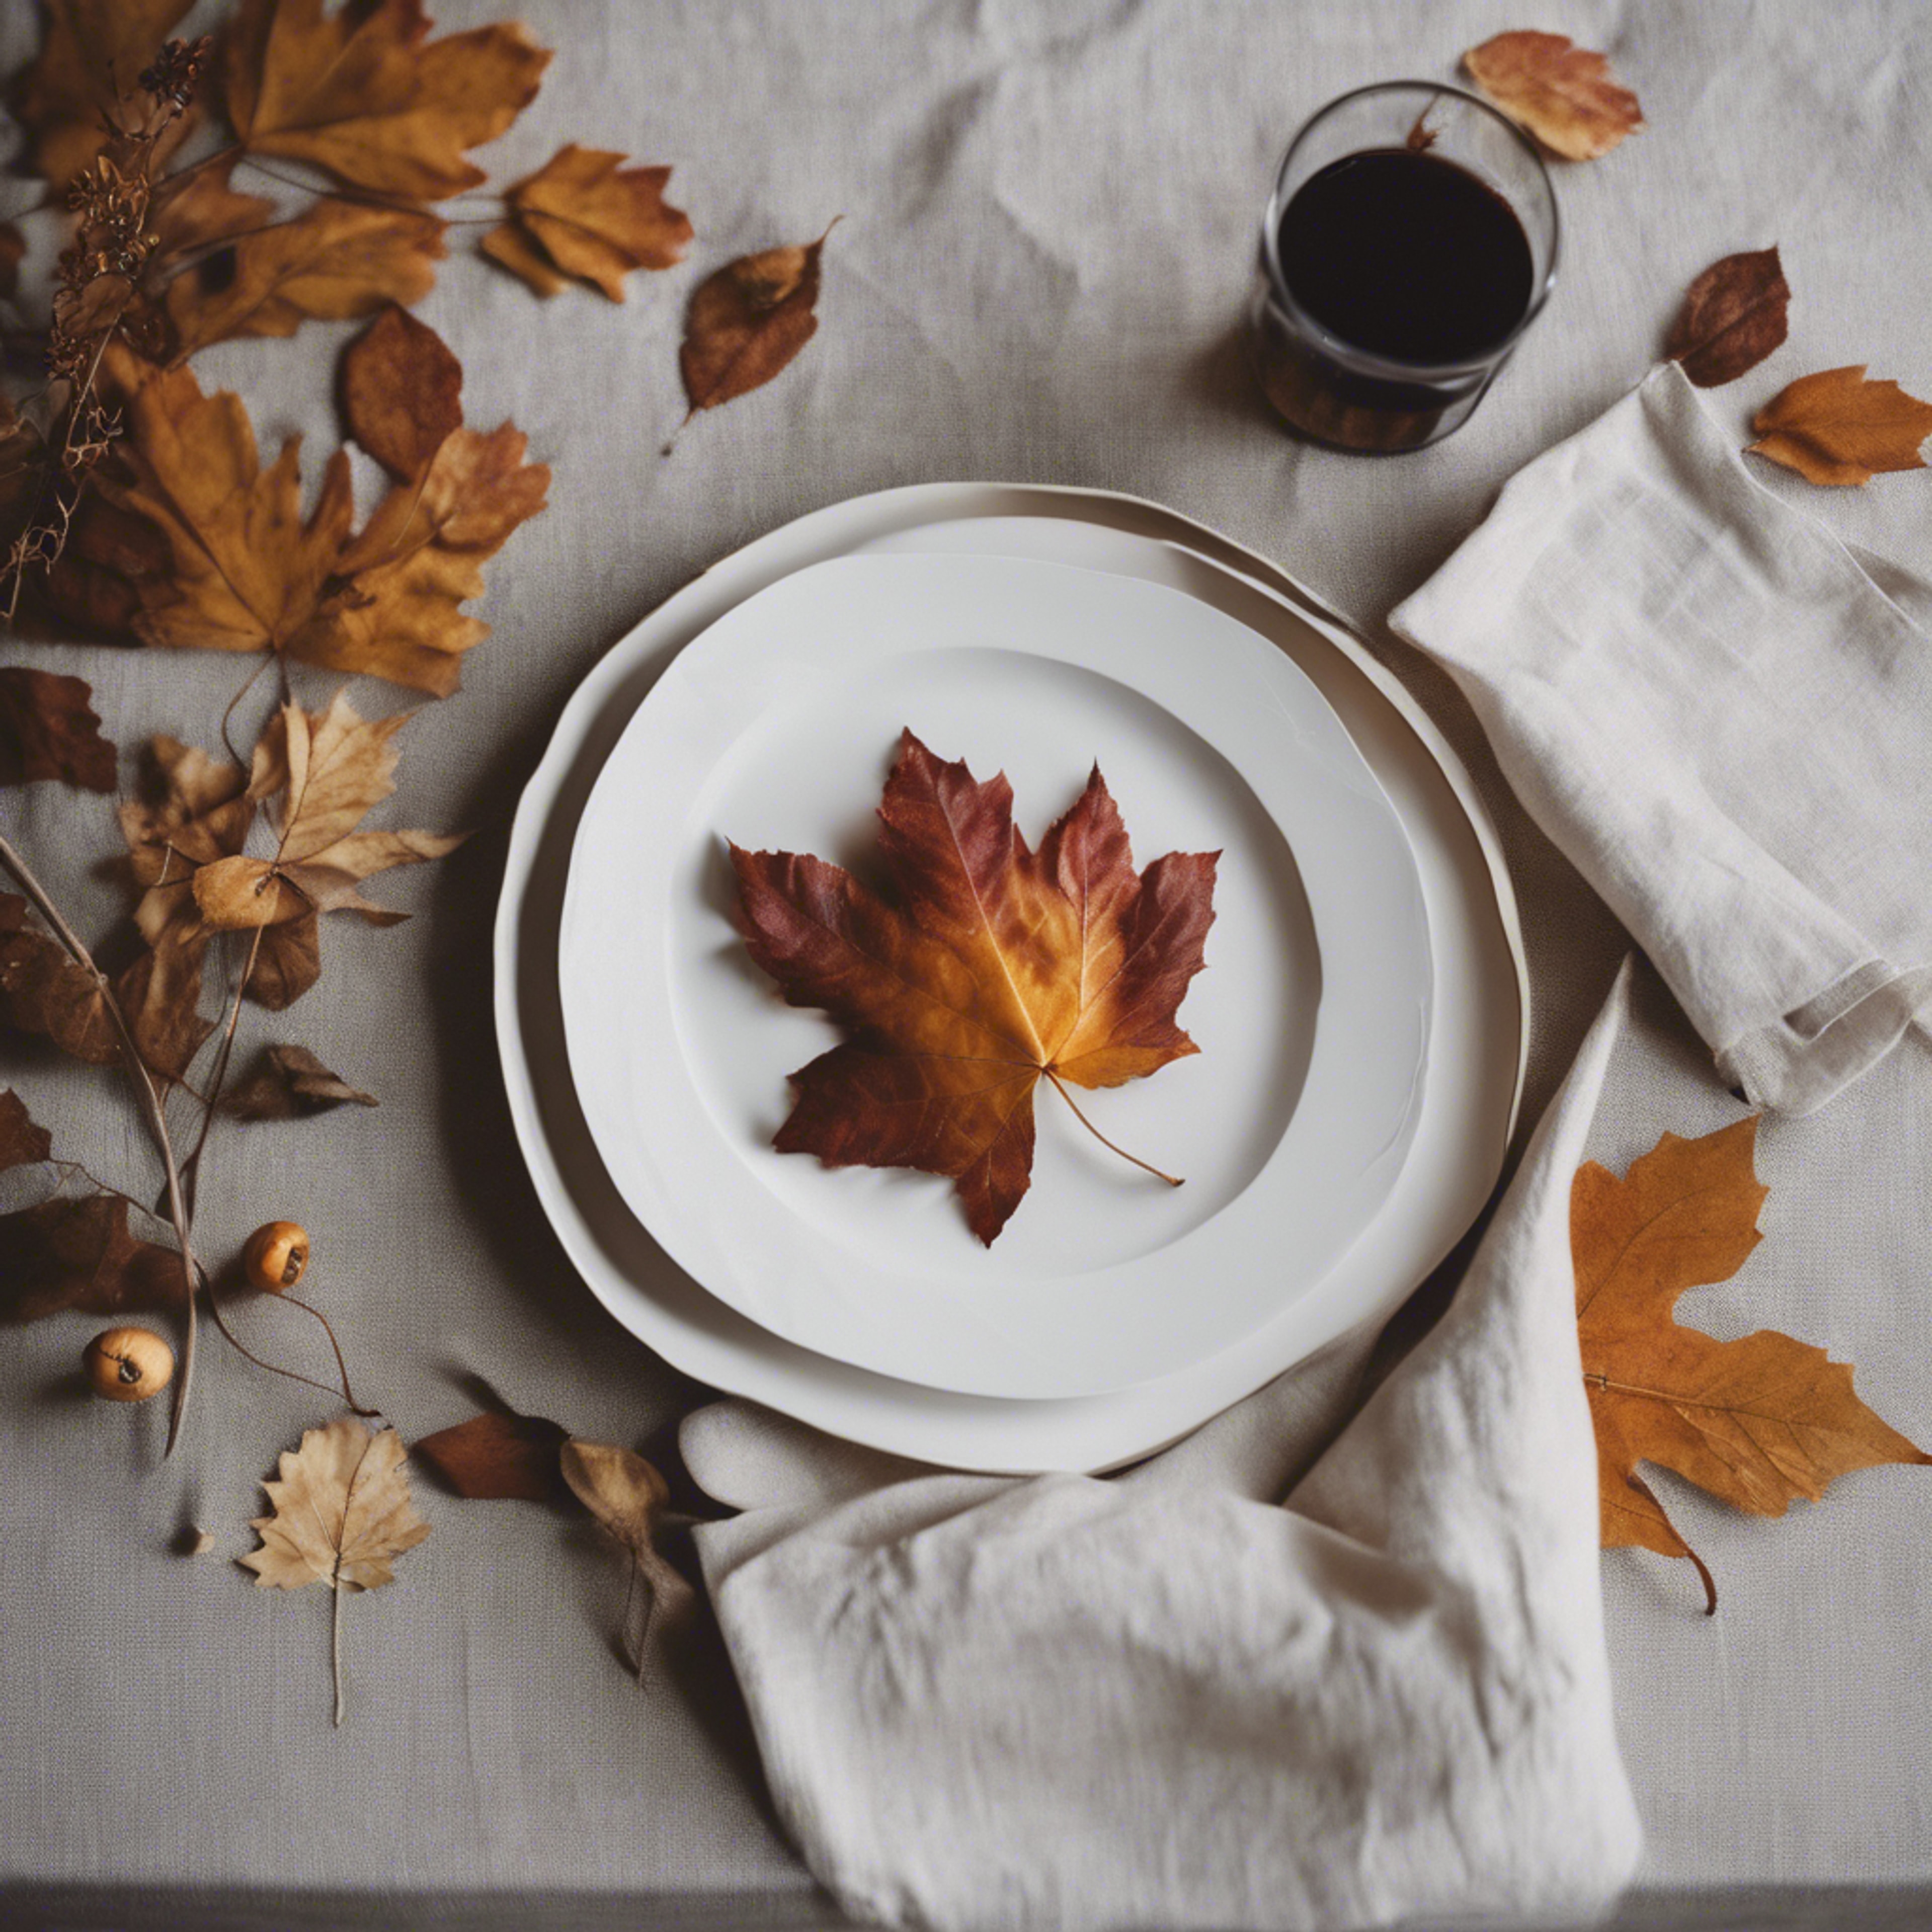 Simplicity-lover's Thanksgiving table decor with minimalistic white plates, natural linen napkins, and a few scattered autumn leaves. Wallpaper[4fdd30c95e164a8e8309]